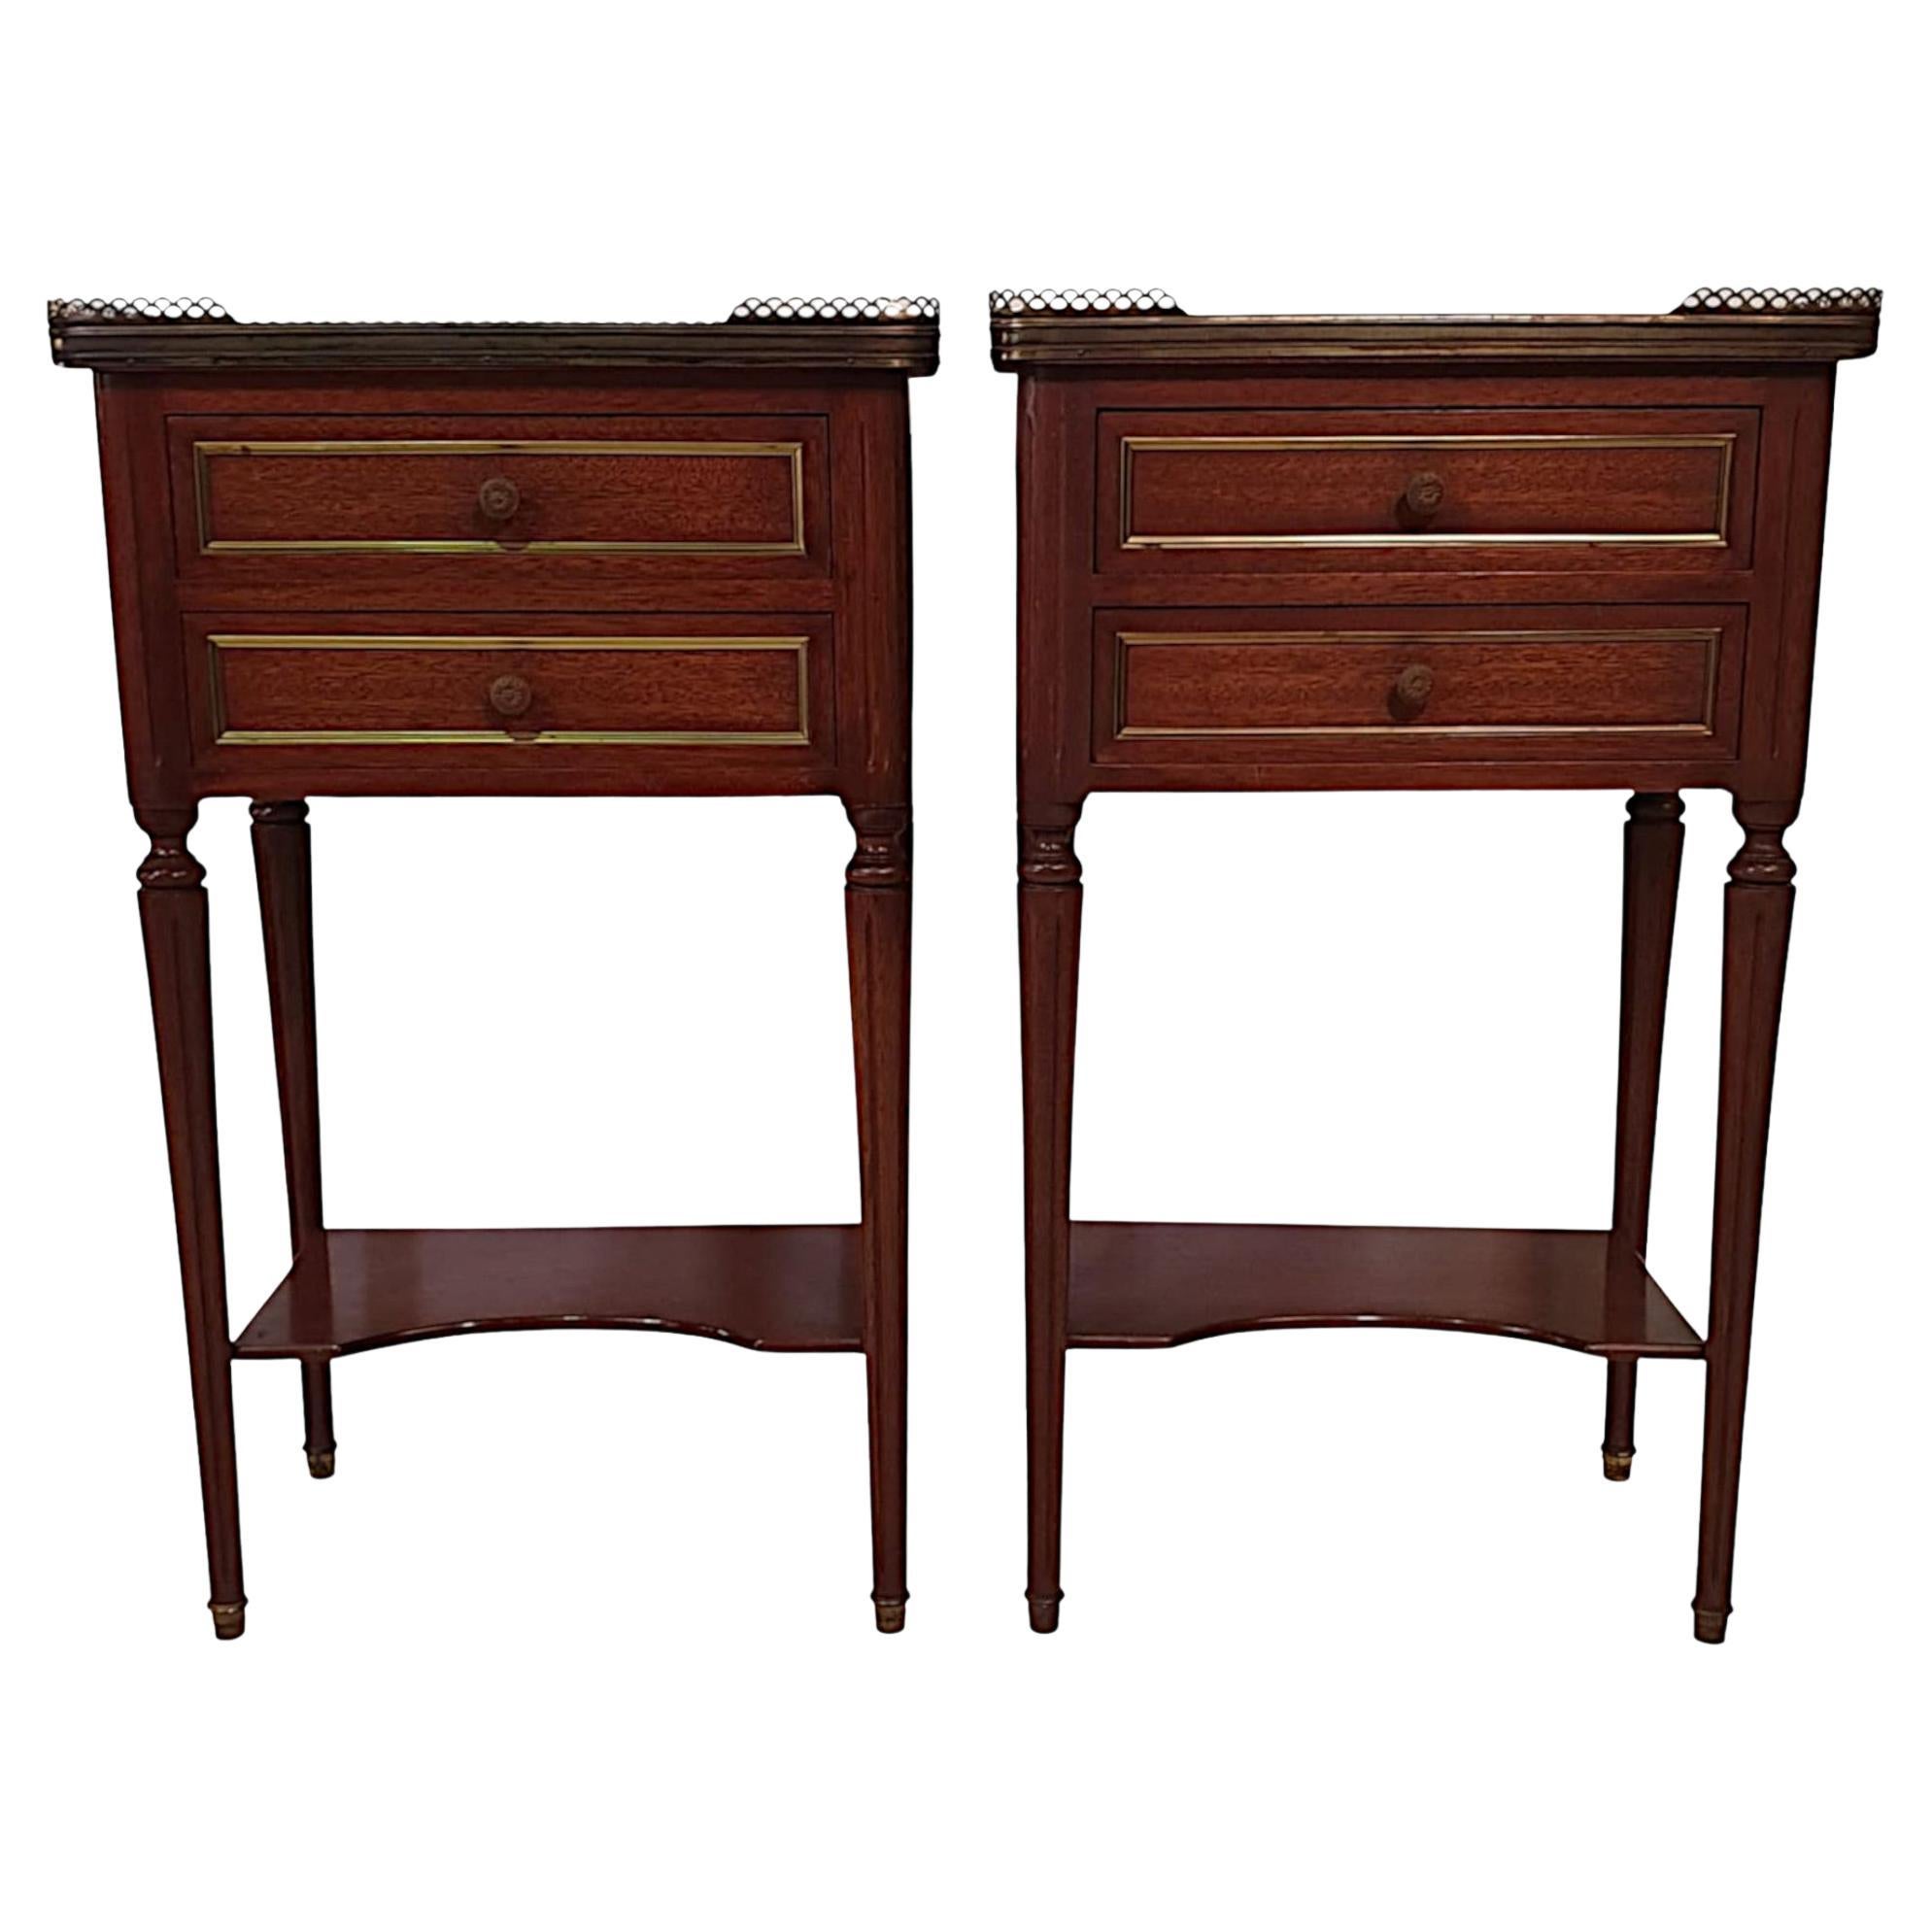 Gorgeous Pair of Early 20th Century Marble Top Bedside Cabinets